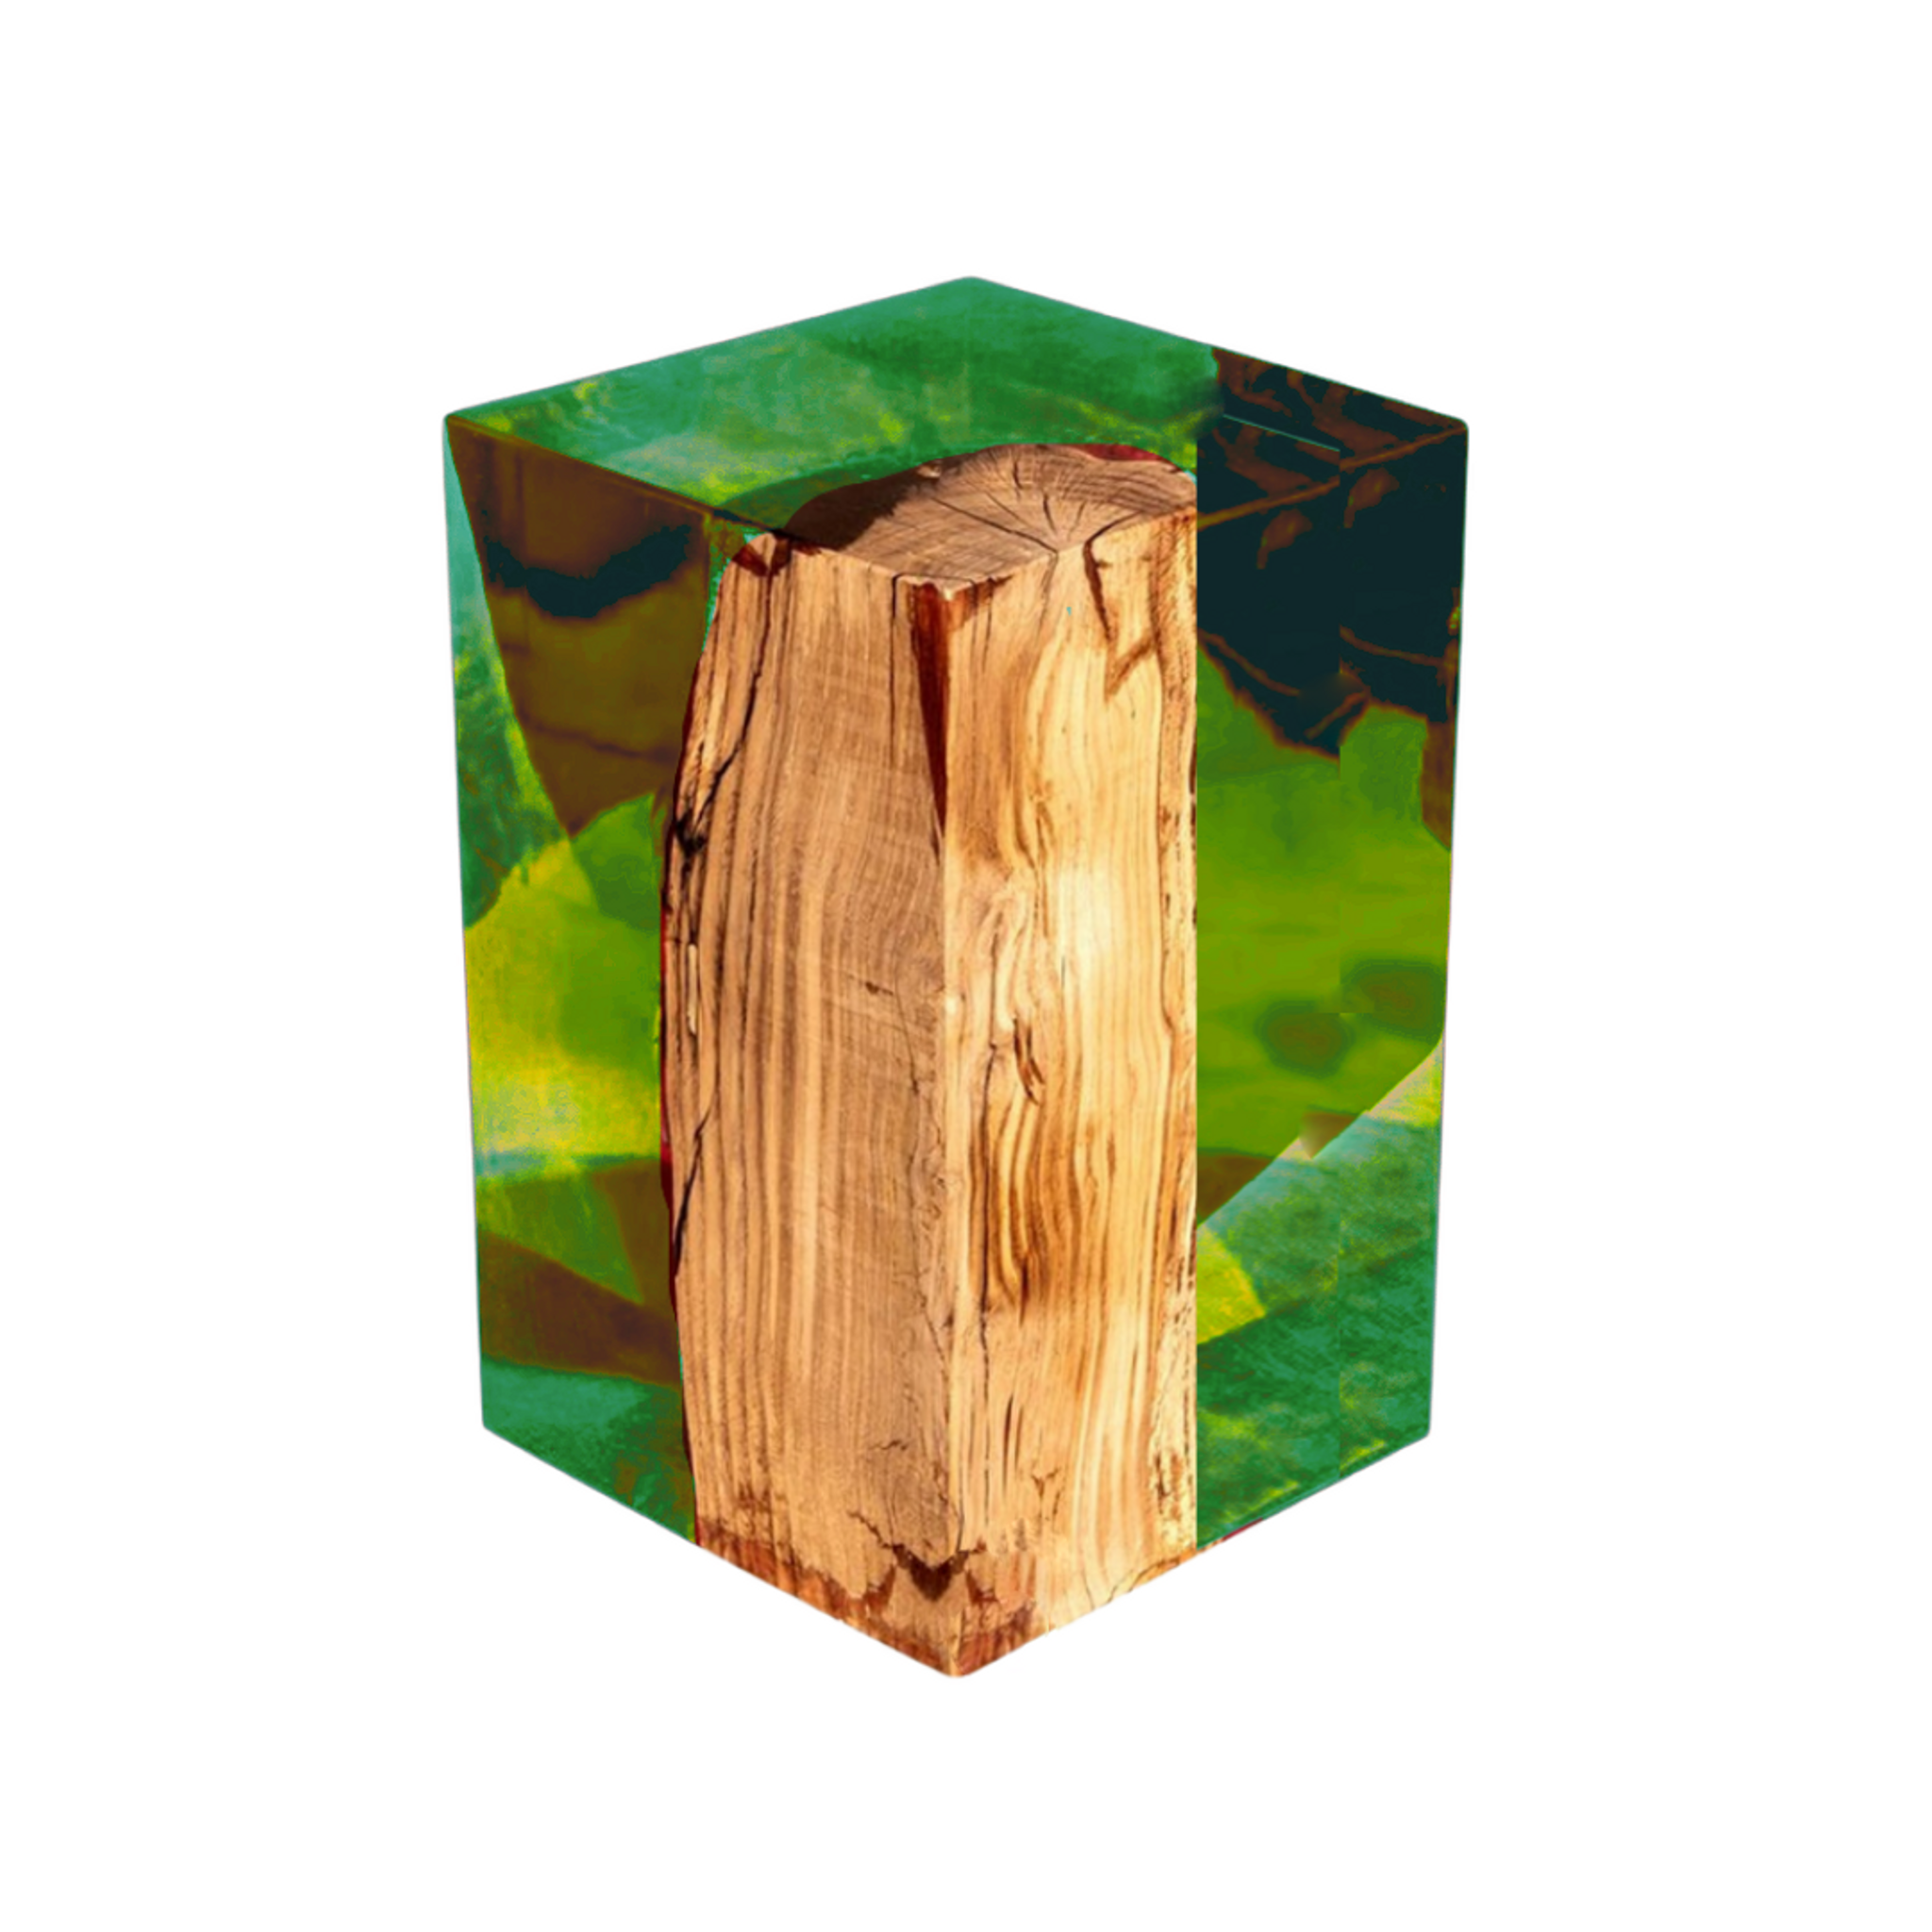 Bright Color Resin and Wood Stump table stool cube